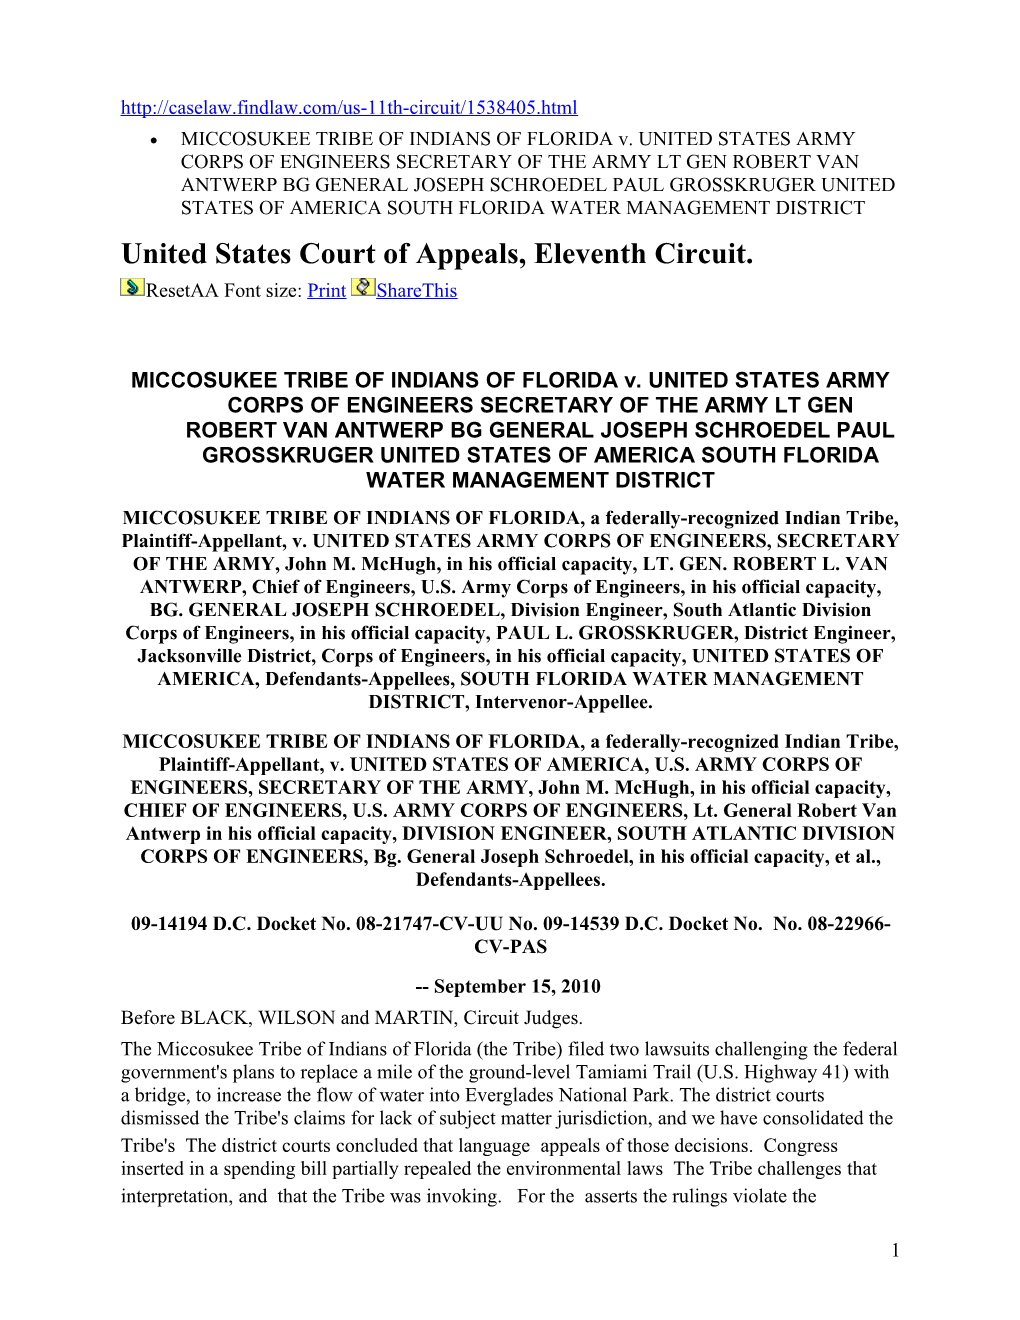 United States Court of Appeals, Eleventh Circuit